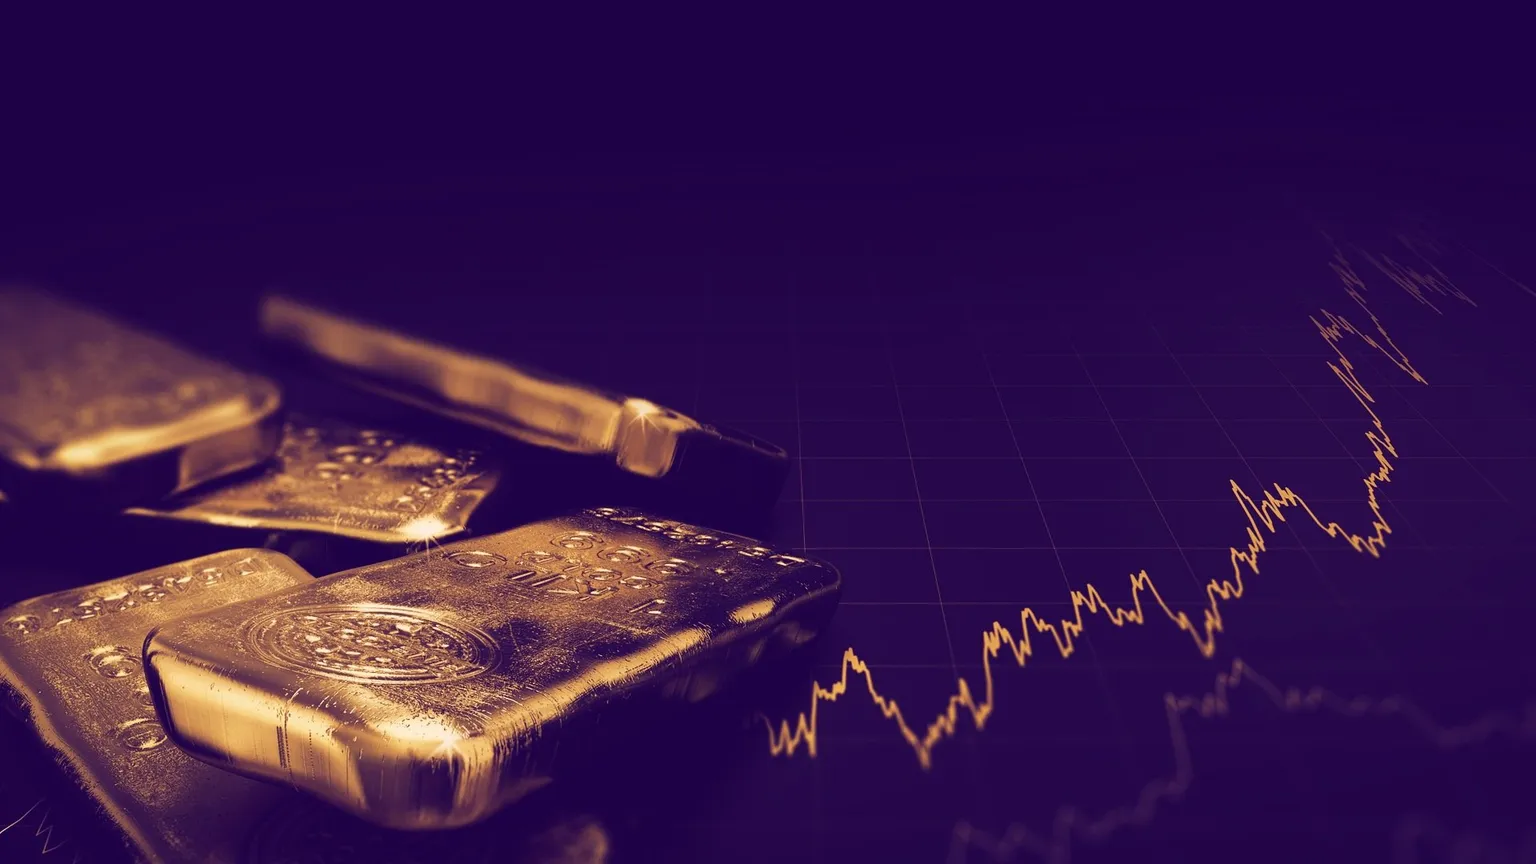 Gold volumes triples as price hits all-time high. Image: Shutterstock